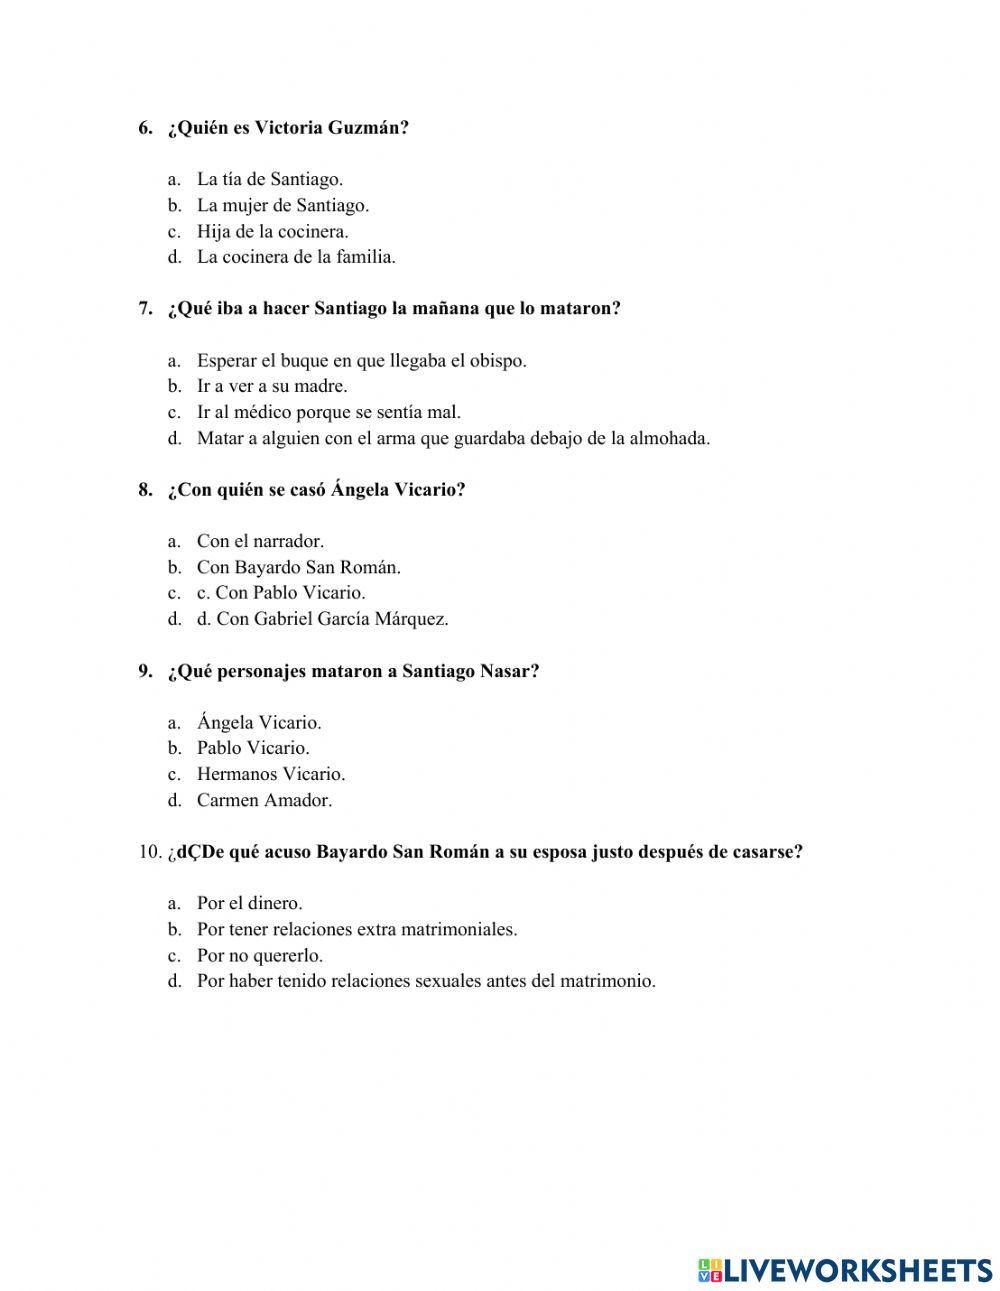 Lectura online exercise for 9NO | Live Worksheets